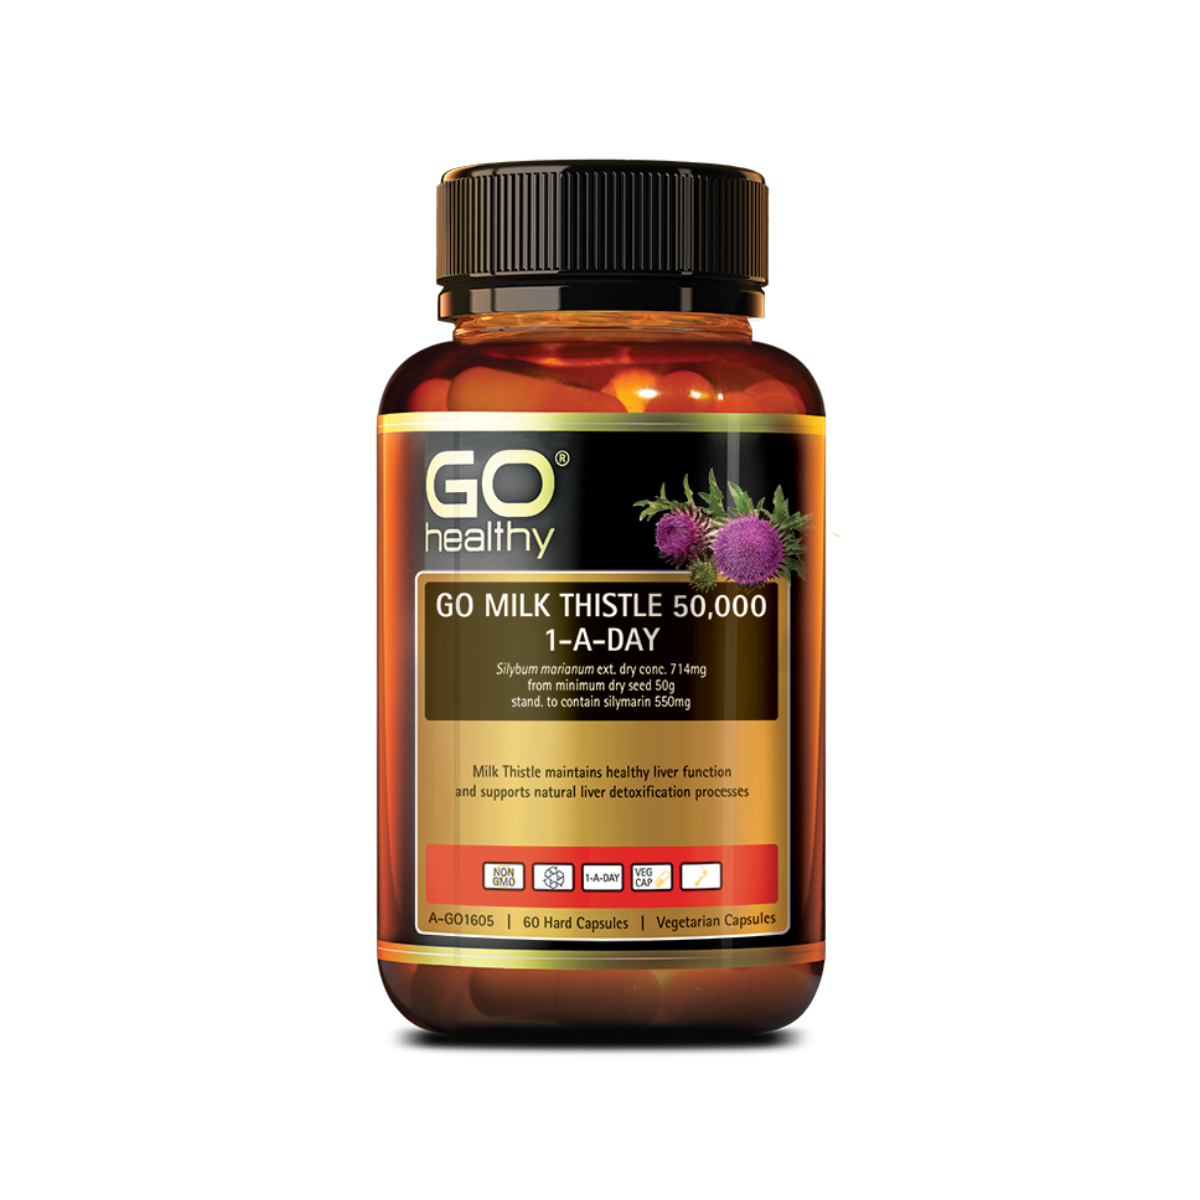 Go Healthy Milk Thistle 50,000mg 1-A-Day 60 Capsules